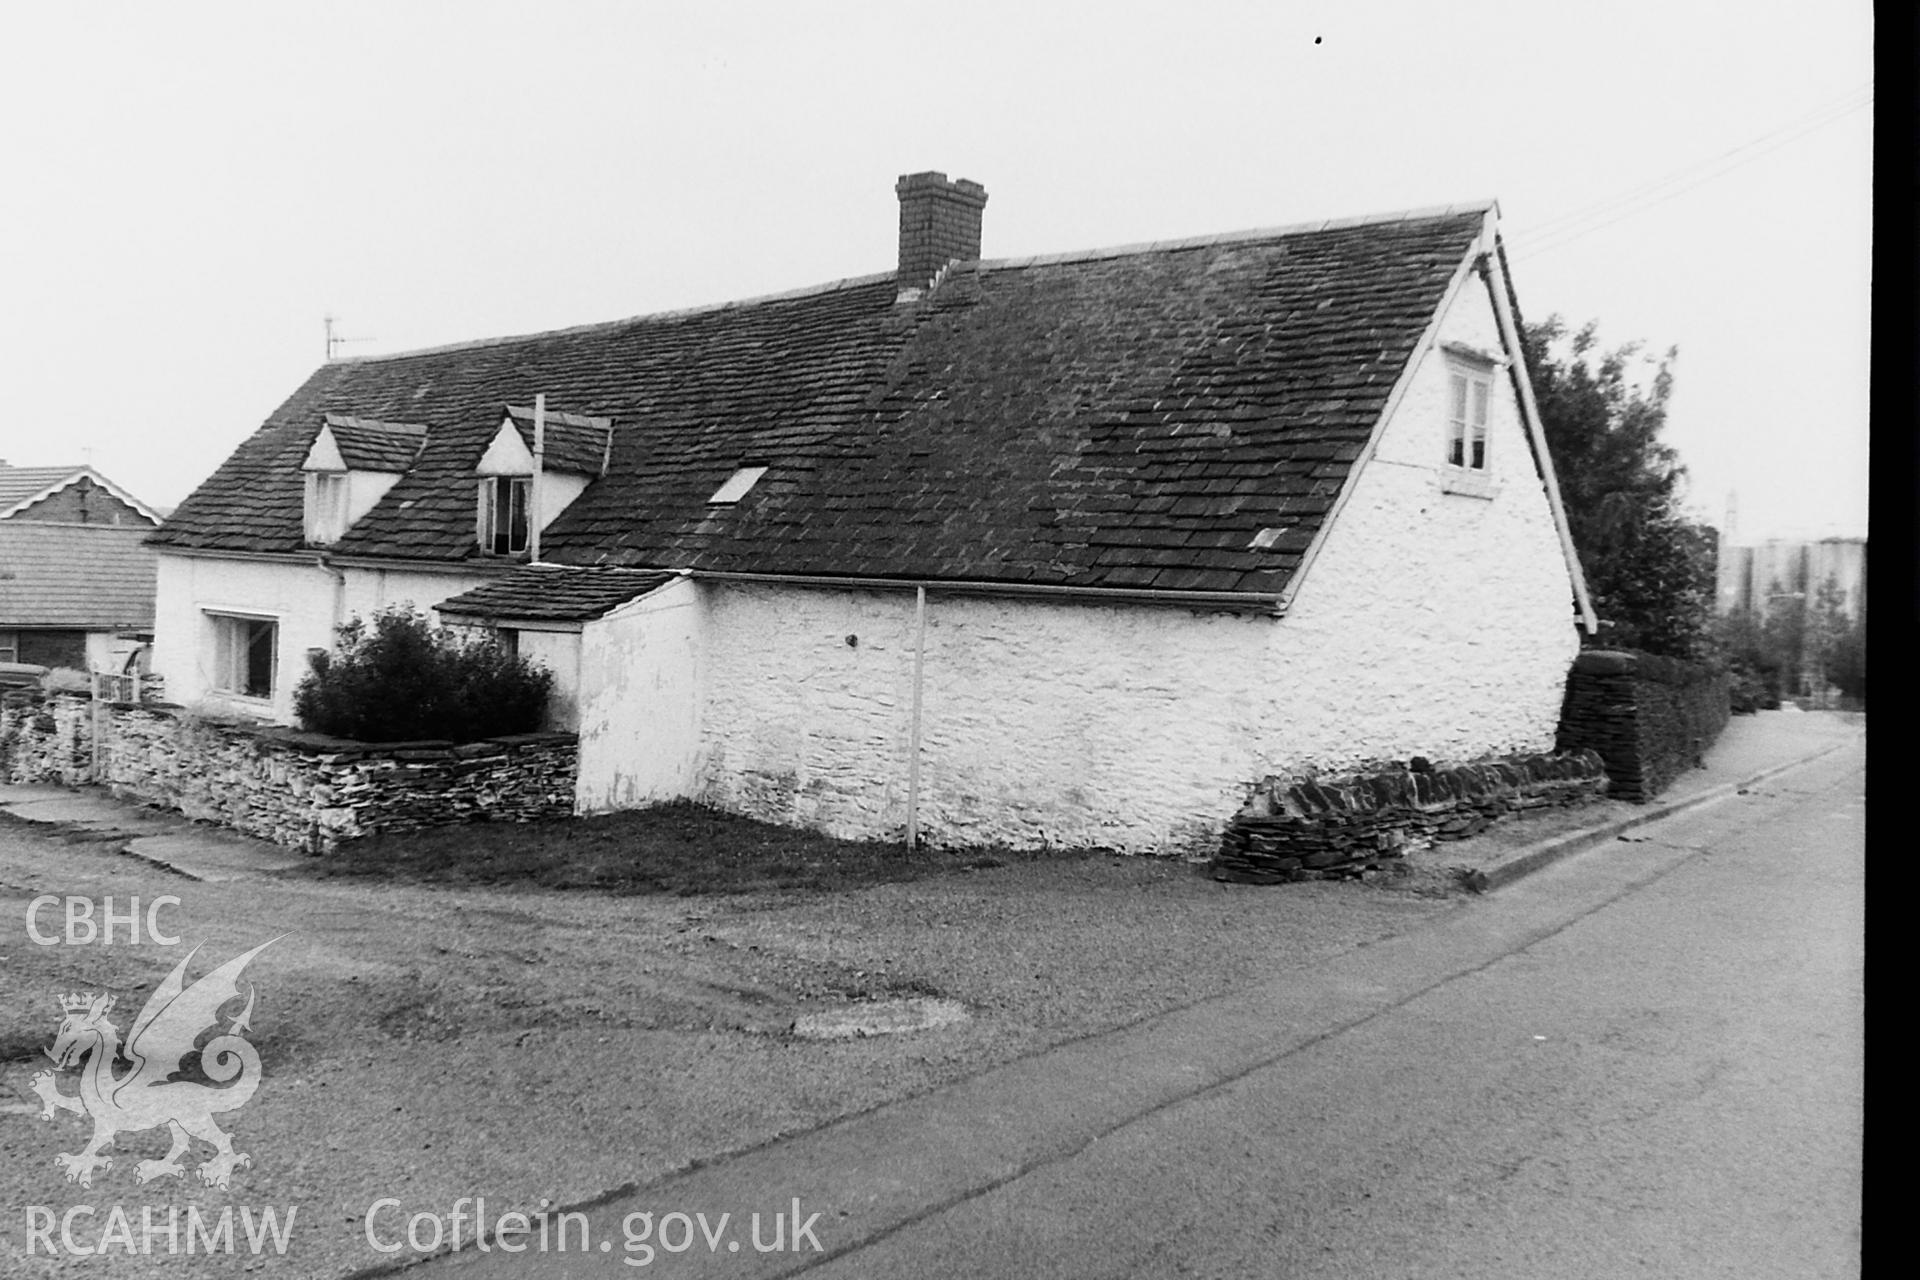 Black and white photo showing Penrhiwlas, taken by Paul R. Davis, undated.